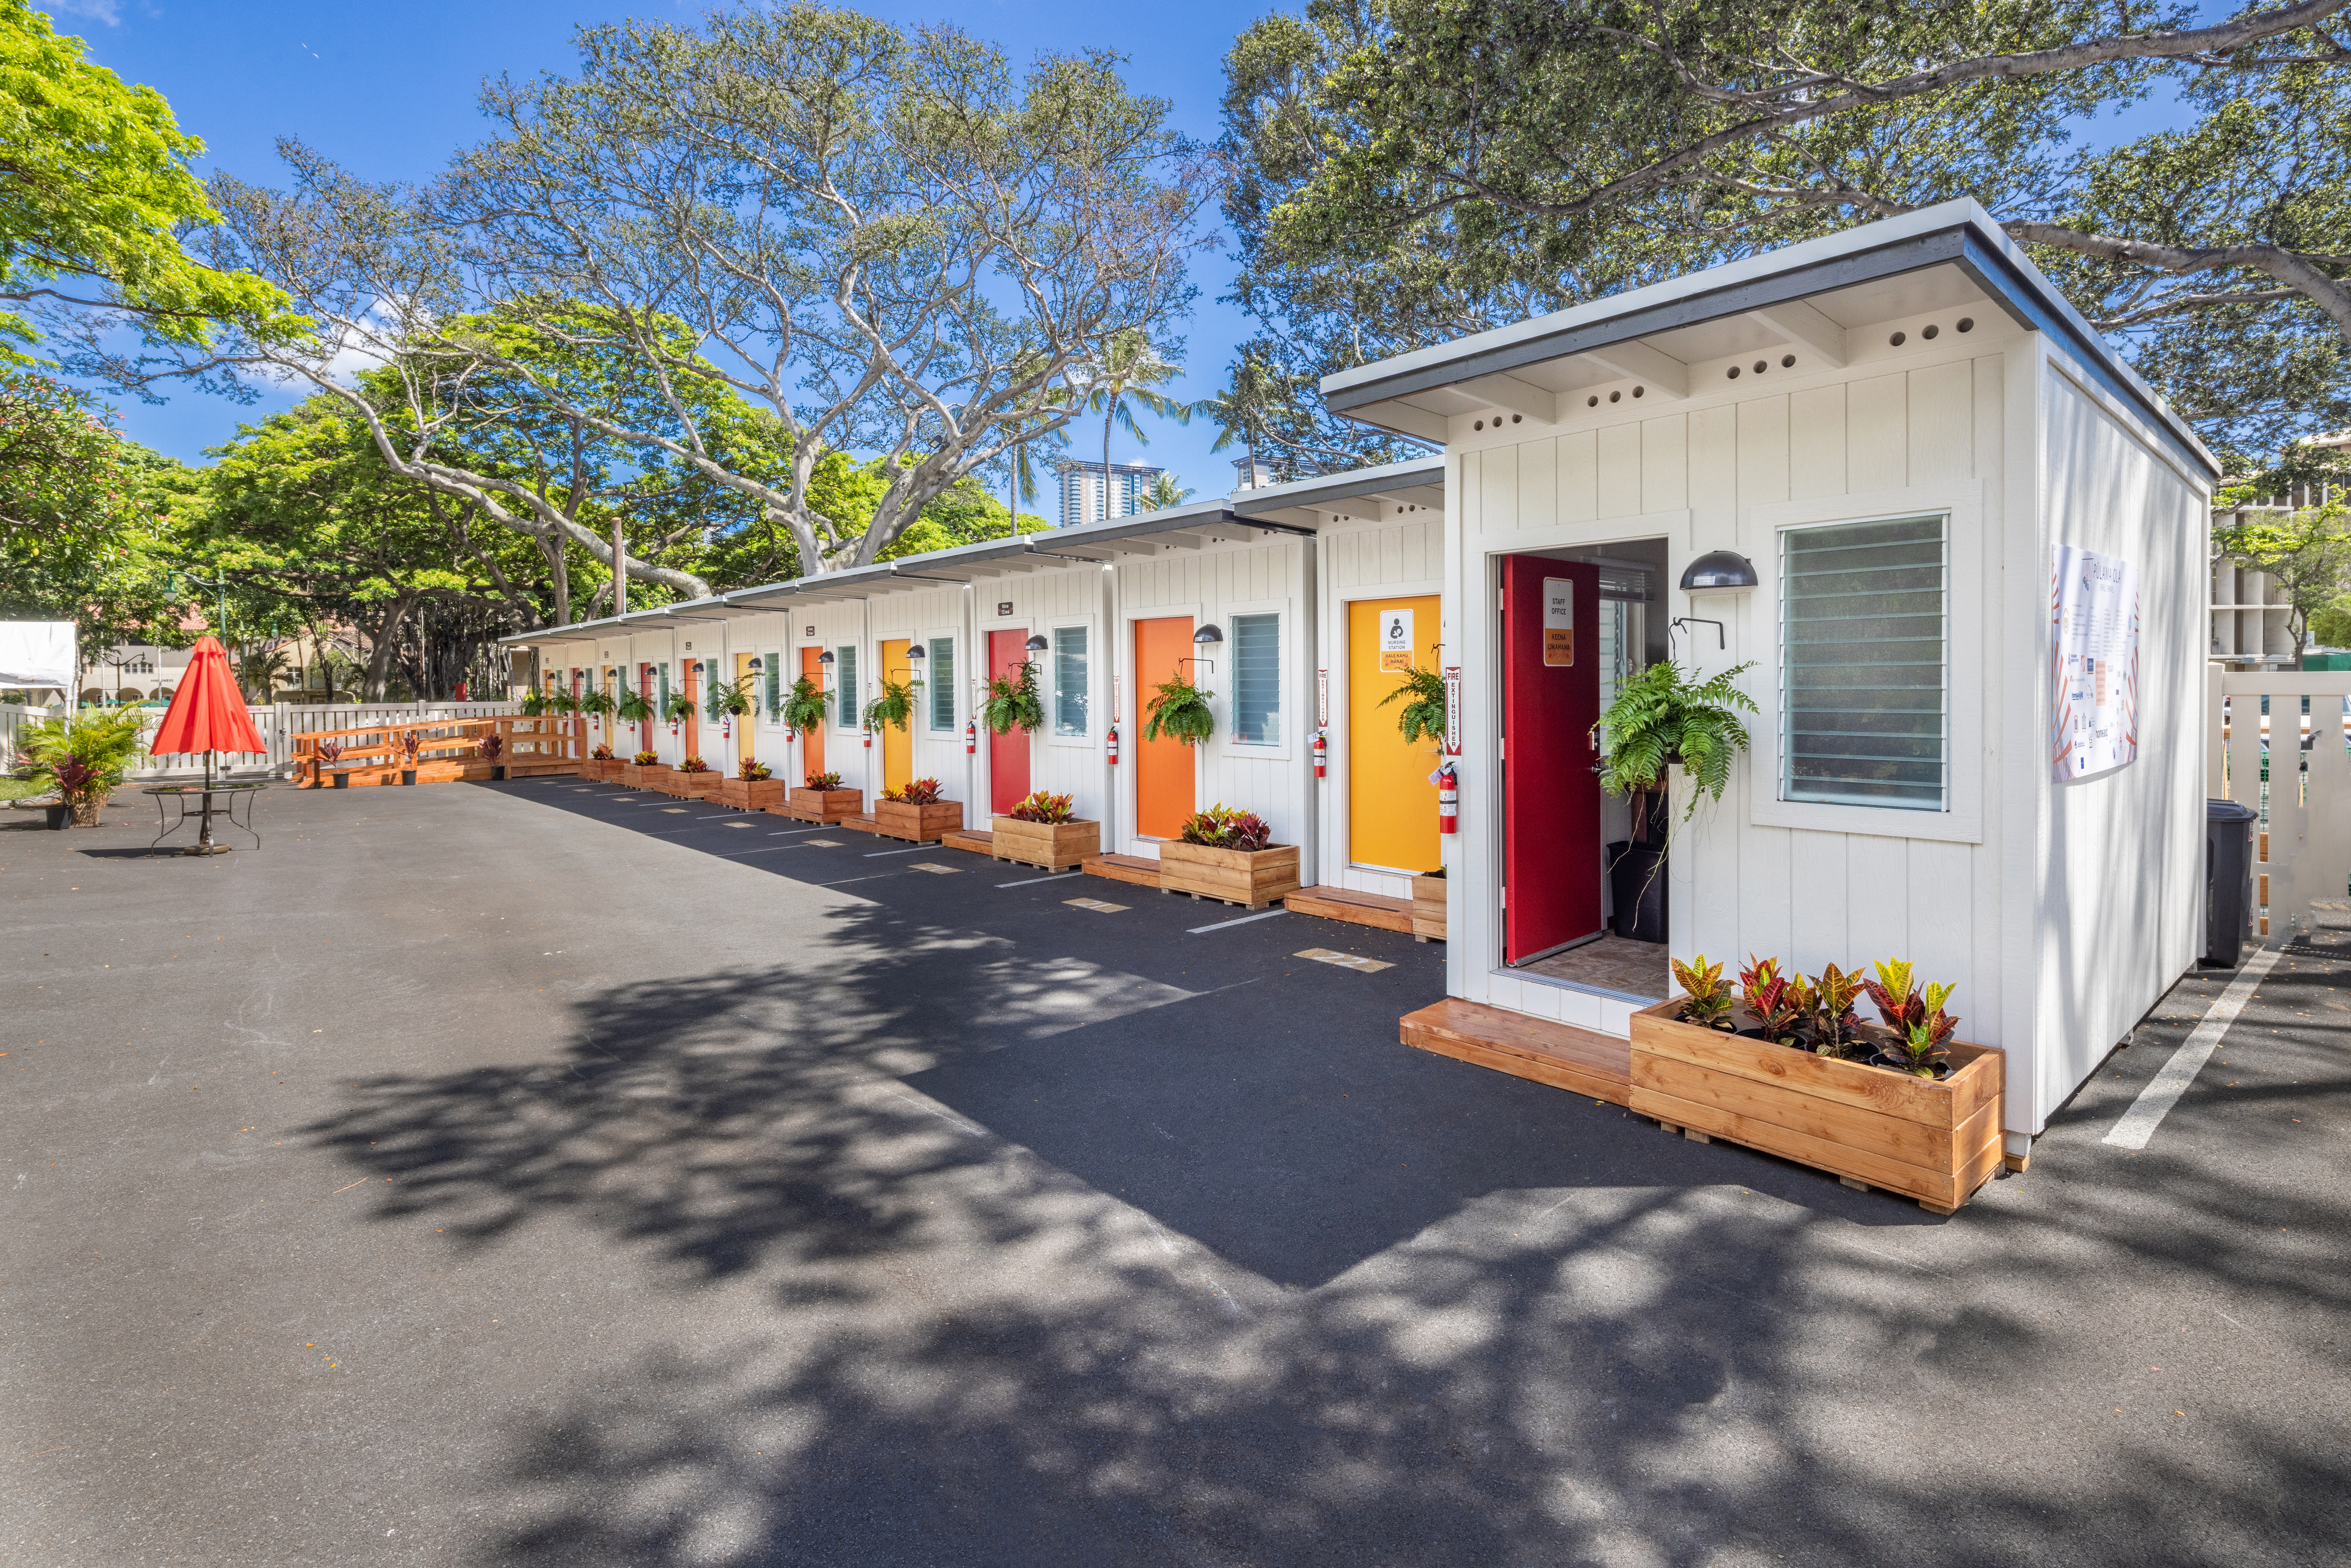 A row of small white pre-fab homes with colorful doors in the sunshine.